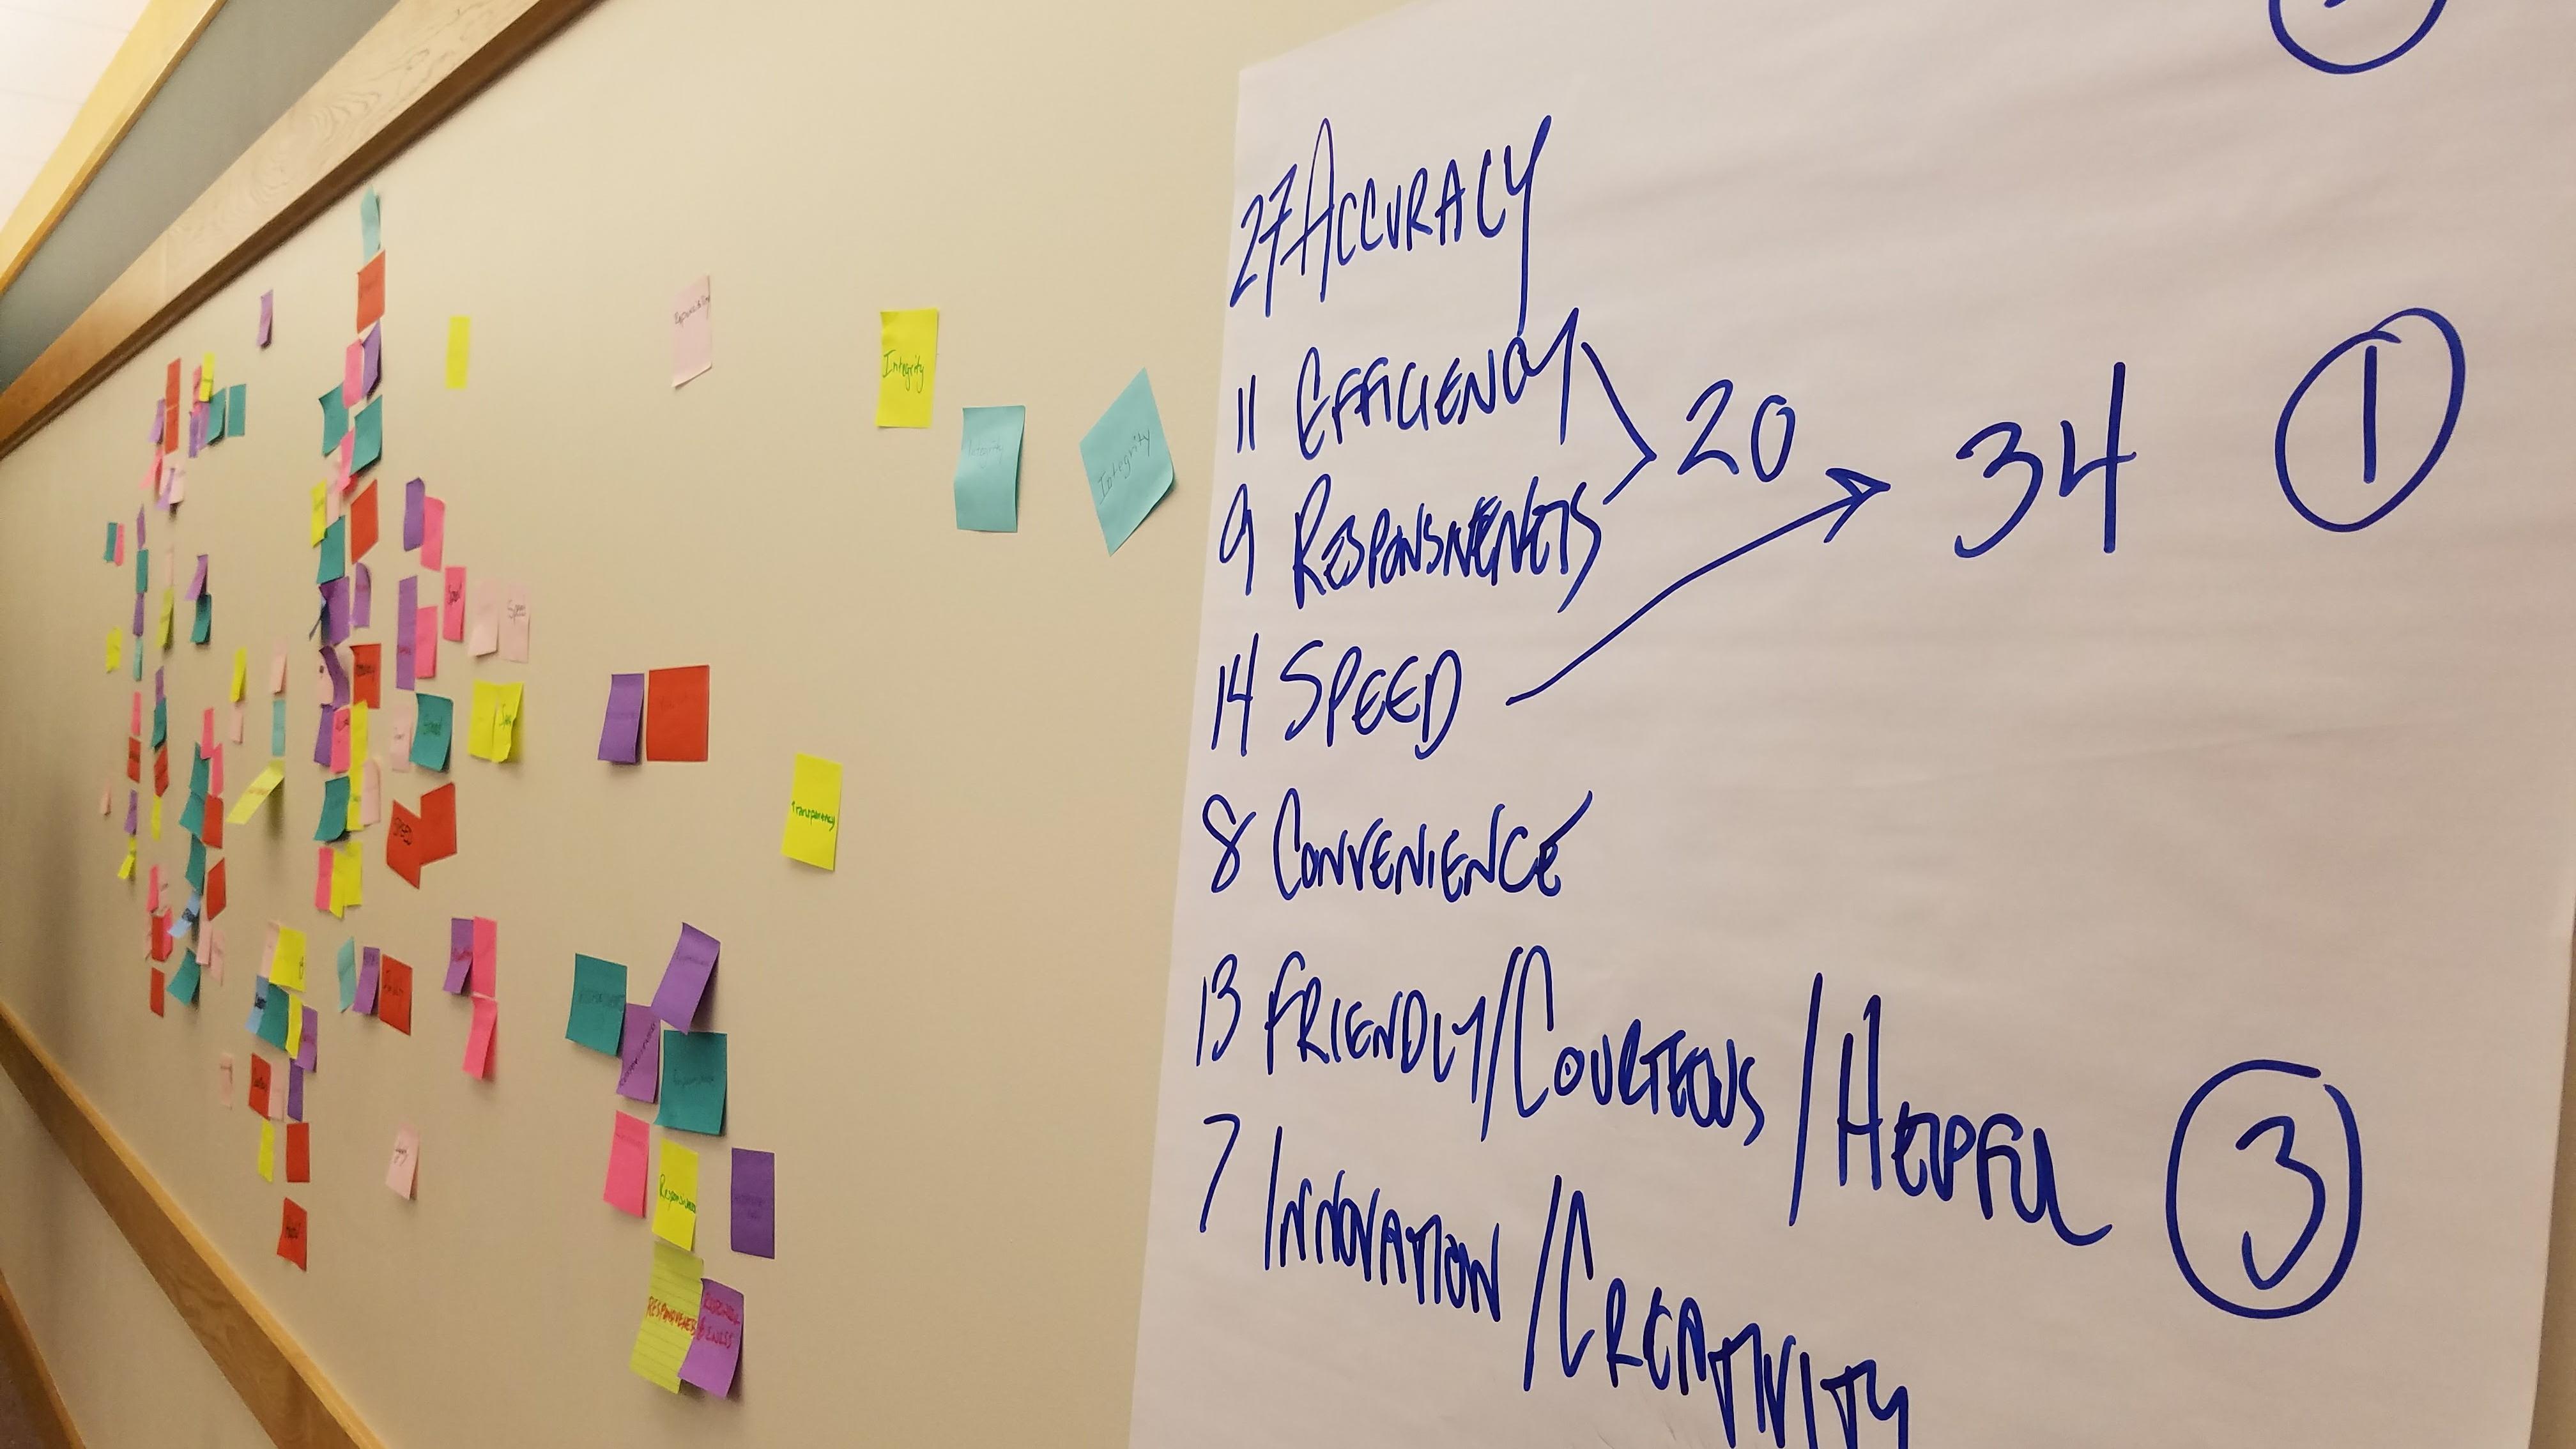 A photograph of a whiteboard with many post it notes and notes from a meeting displayed.